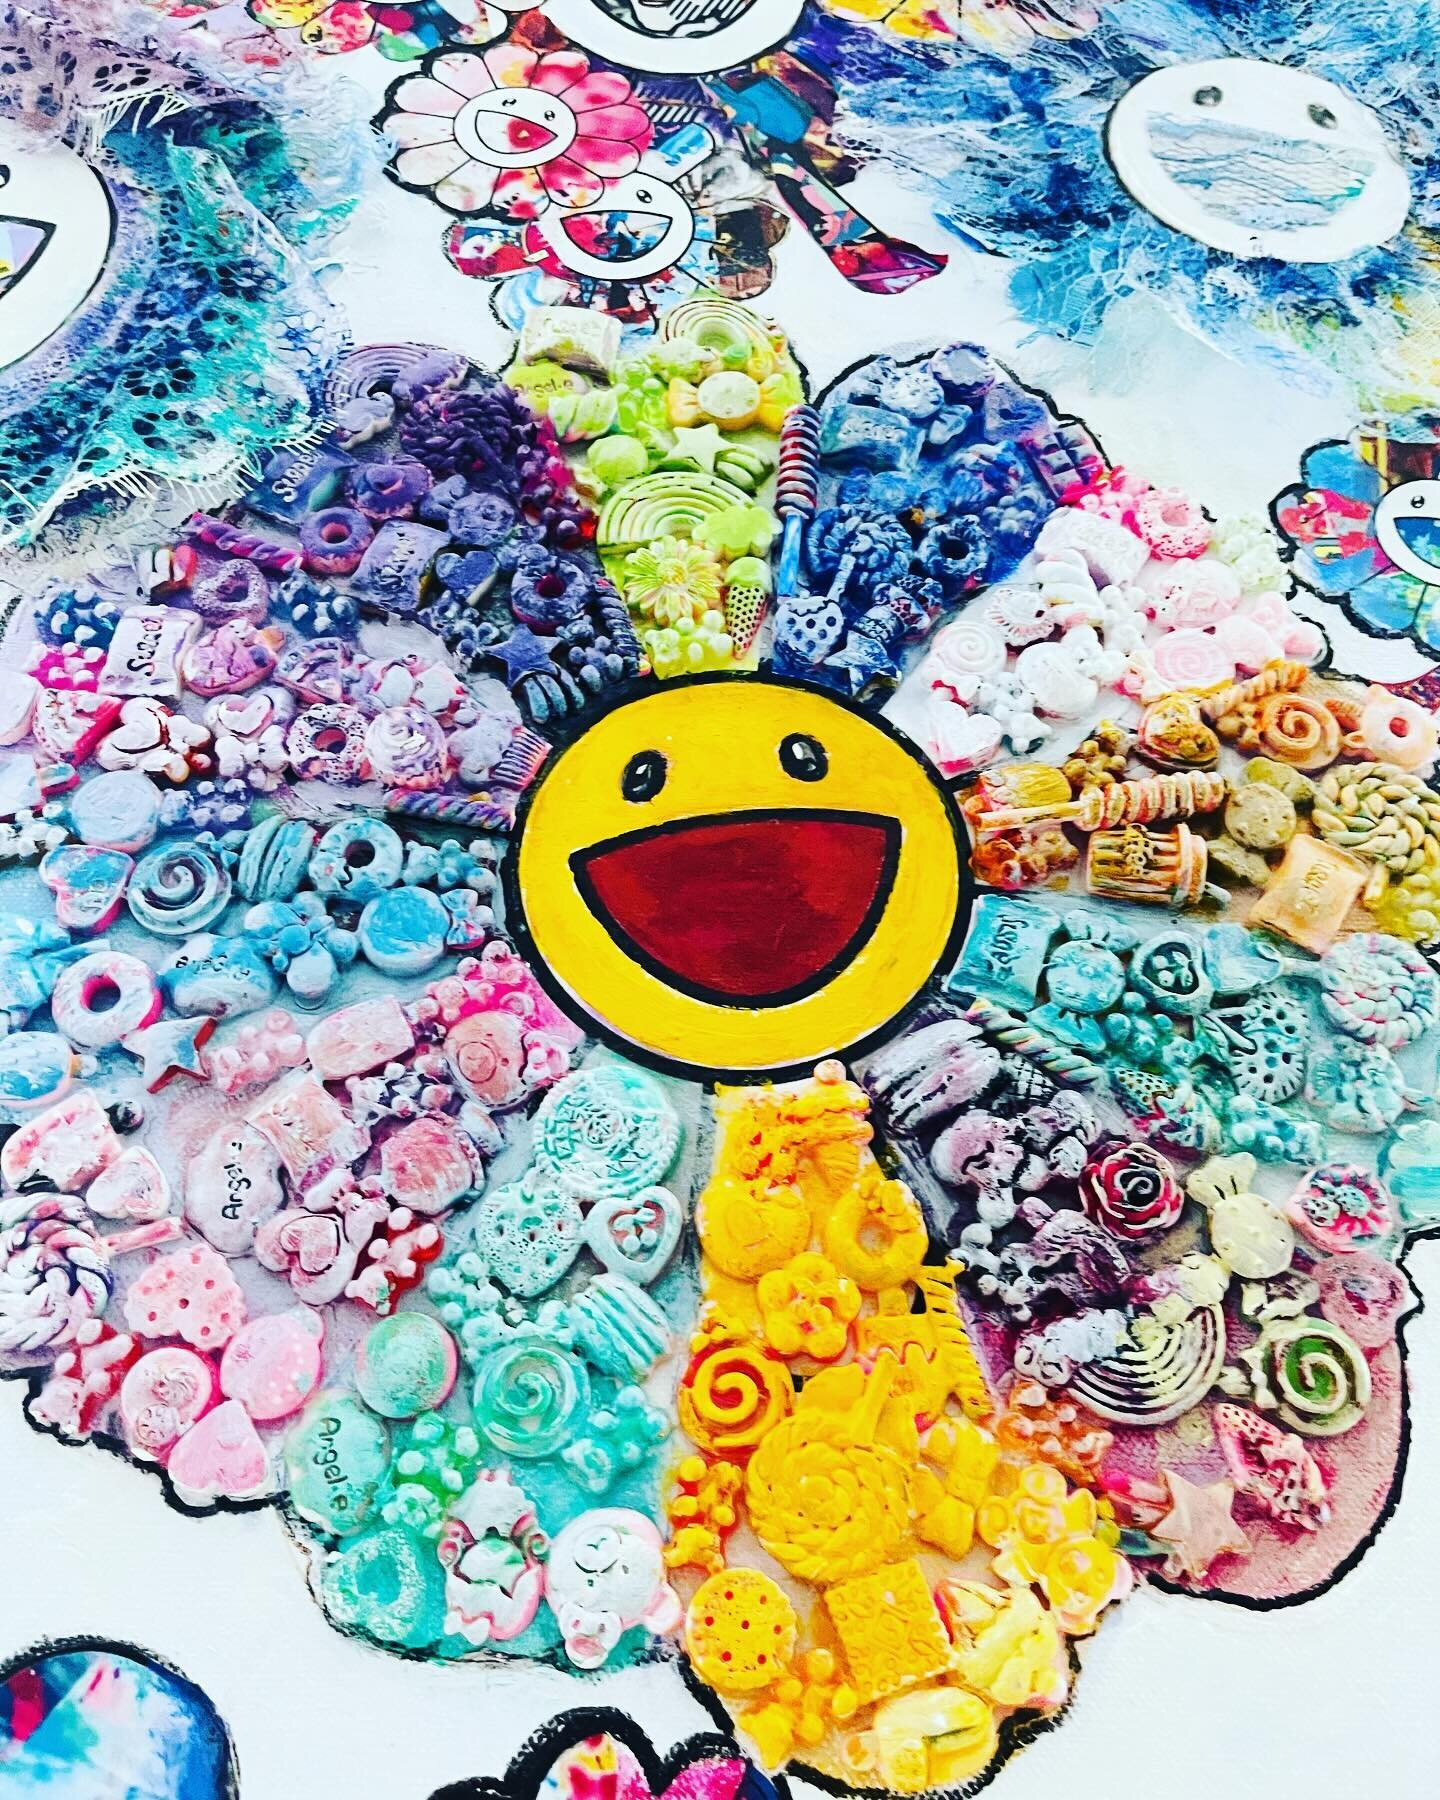 the Smiley Flowers 
celebrating #internationalwomensday #womens #womensday 

inspired by Murakami, each flower serves as a canvas adorned with empowering imagery that celebrates the strength and resilience of women. layering between found media and m